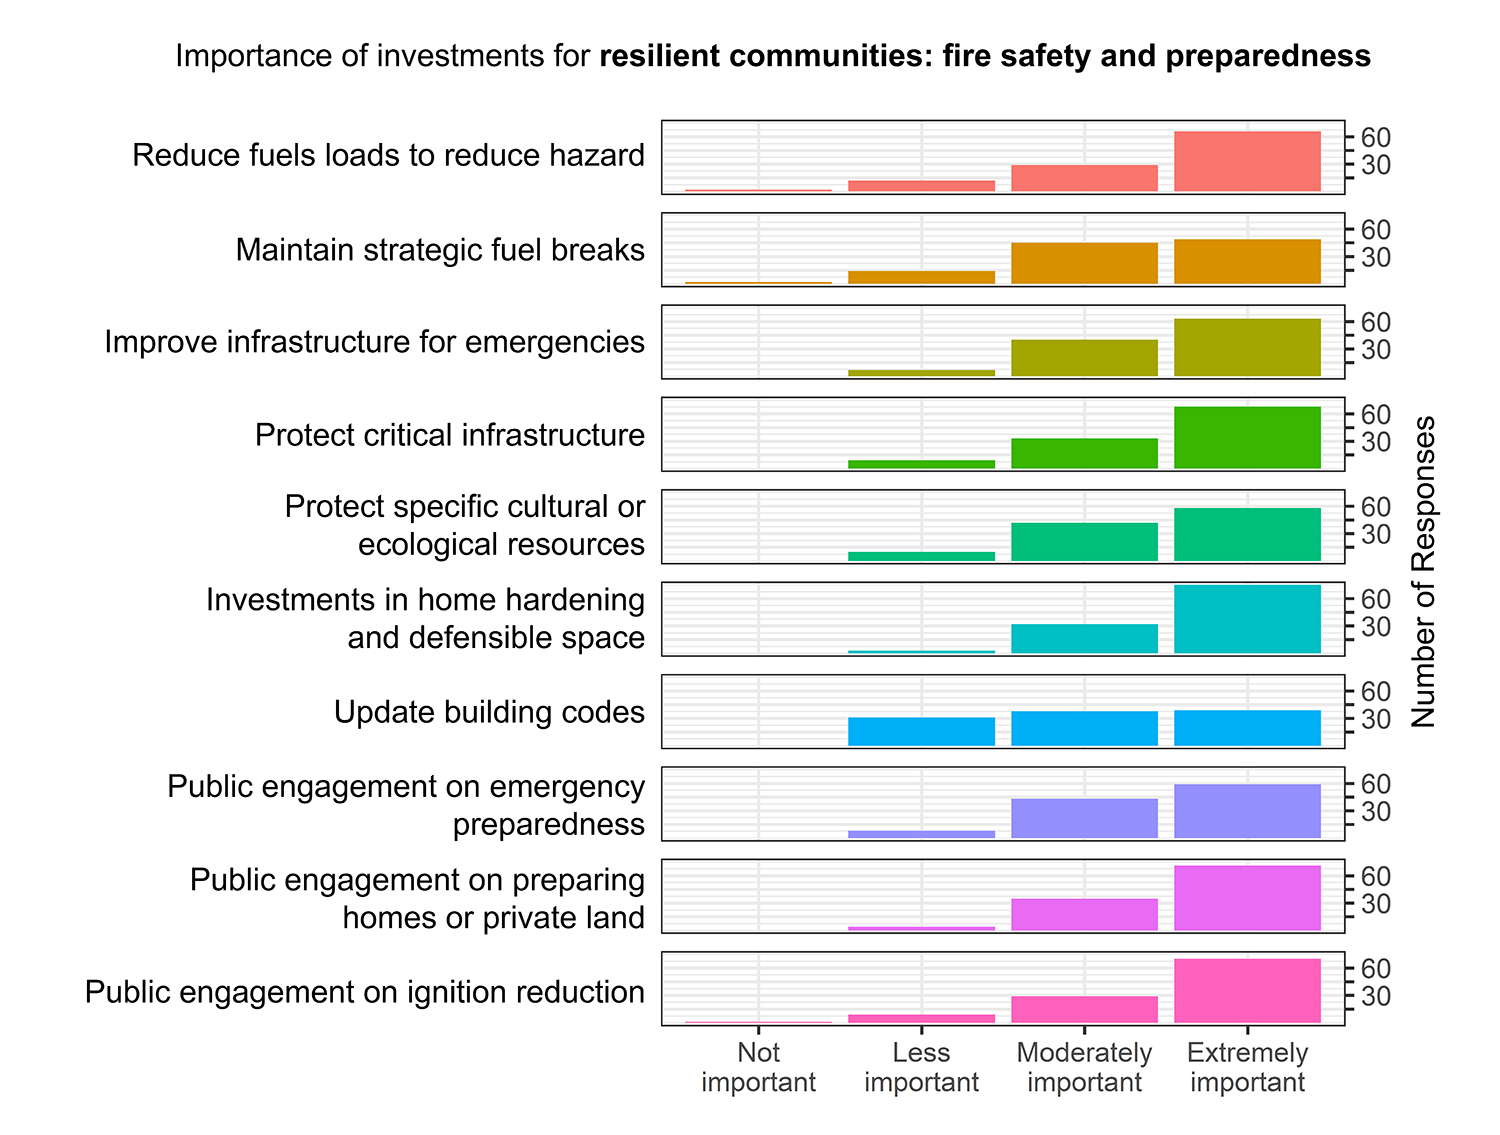 Histogram of Importance of Investments for resilient Communities: Fire Safety and Preparedness